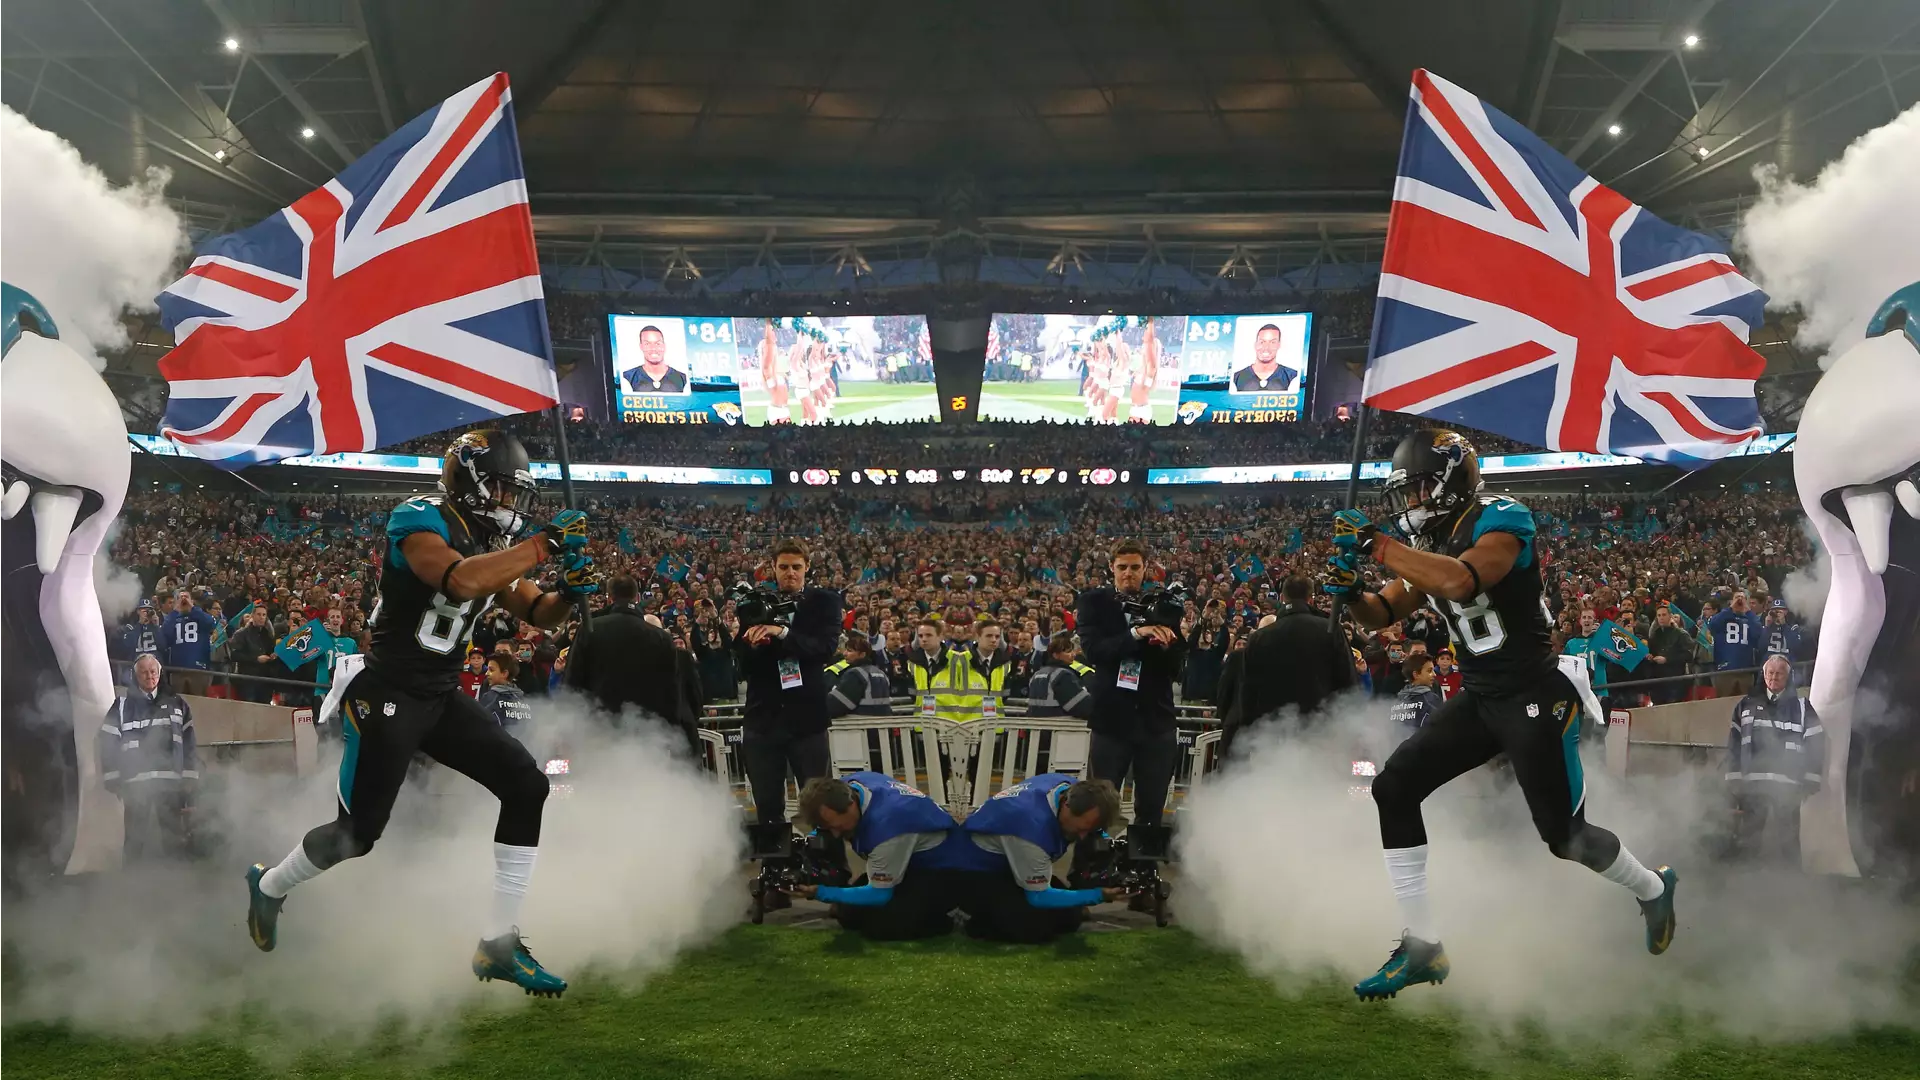 Beer, Banter And Blockbusters: These UK Fans Explain How They Got Into NFL